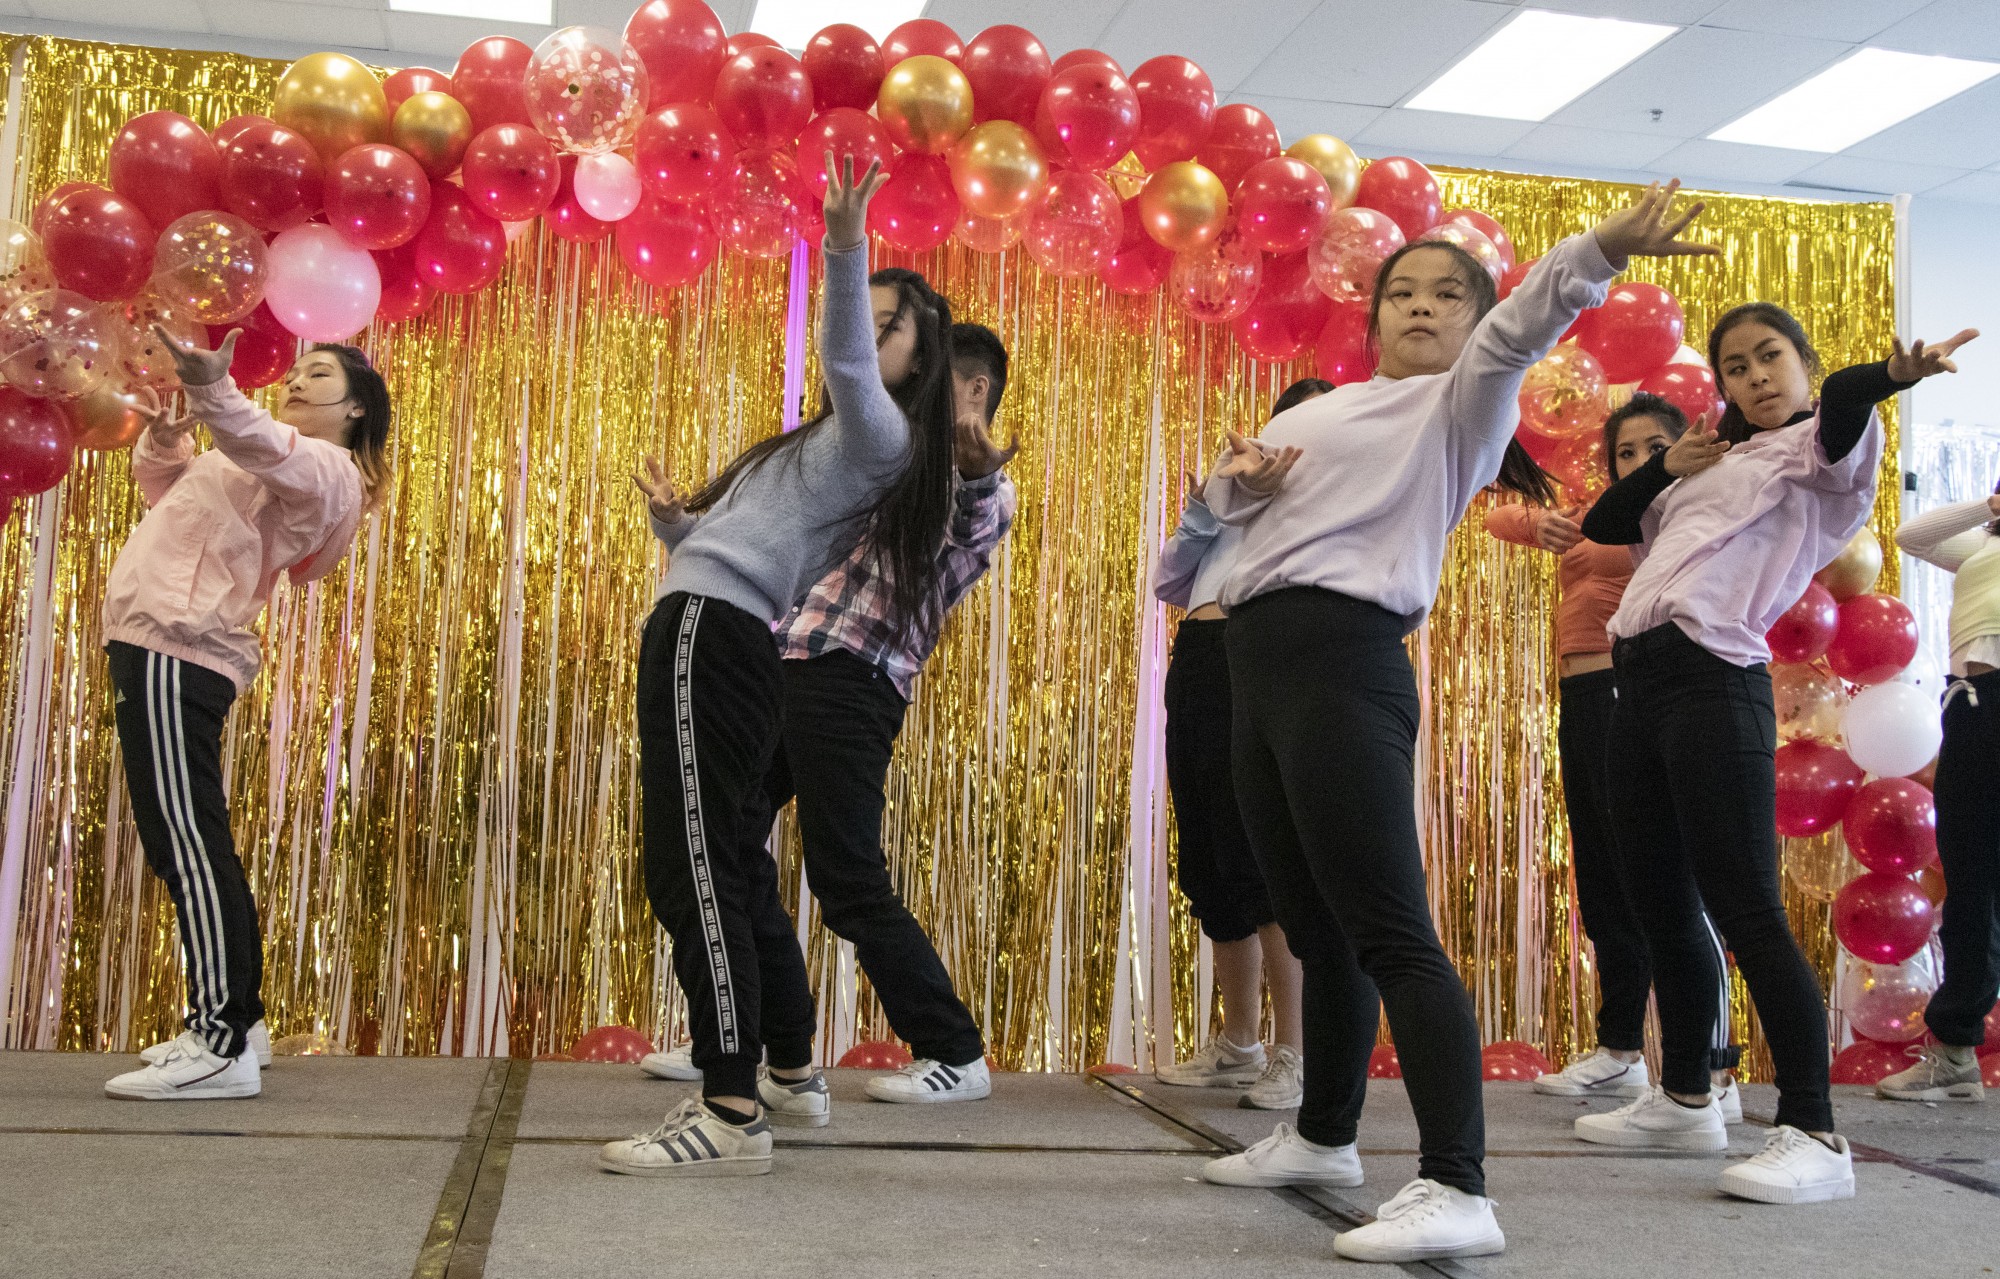 Cre.ture Crew members perform a Korean Hip-hop dance routine at the Lunar New Years celebration at the University Food Court on Sunday, Jan. 26.